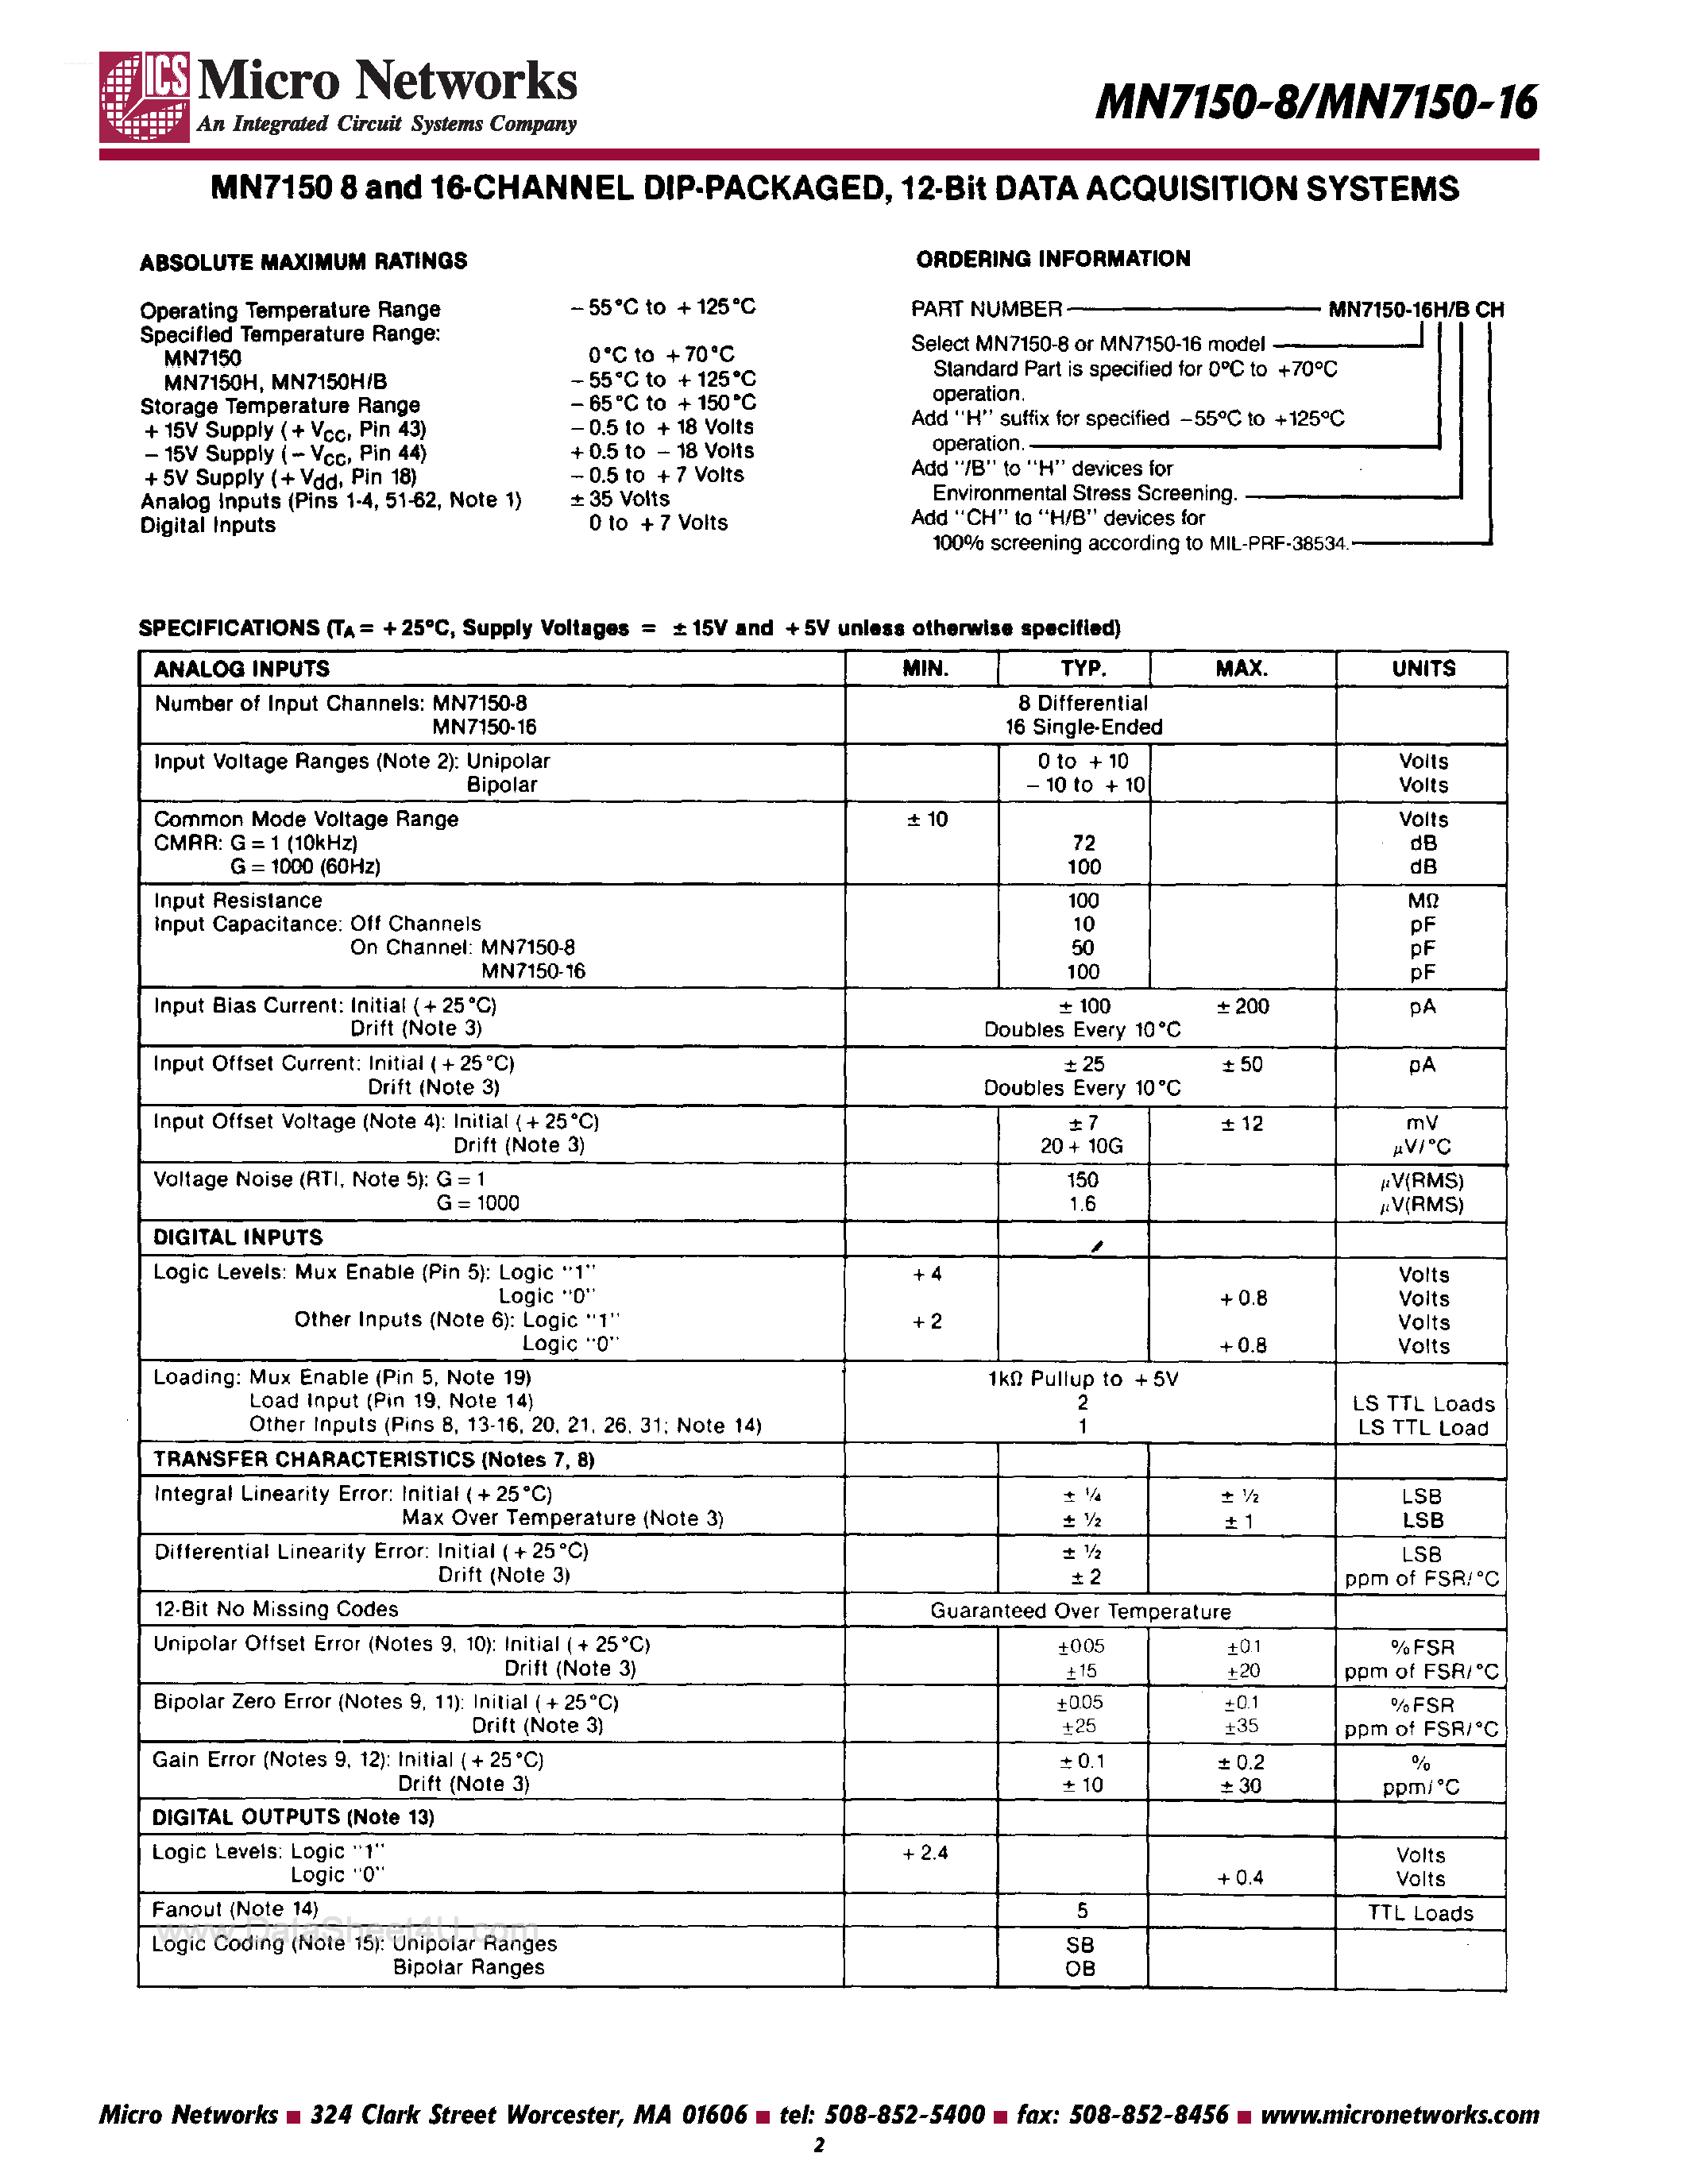 Datasheet MN7150-16 - (MN7150-8/-16) 8 and 16-Channel DIP Packaged 12-Bit Data Acquisition System page 2